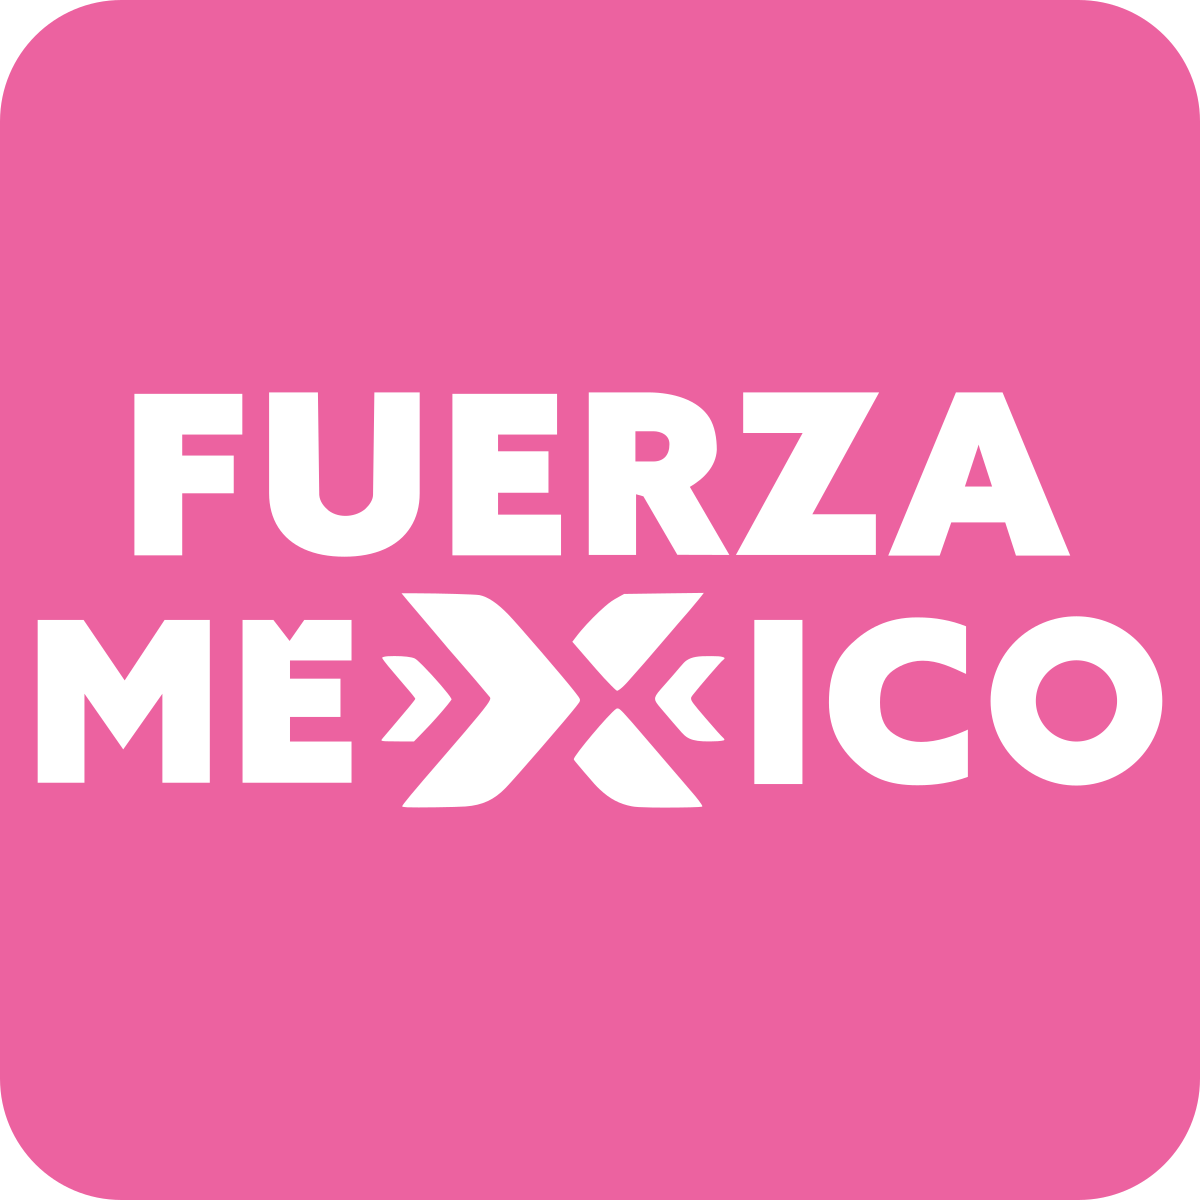 Force for Mexico - Wikipedia